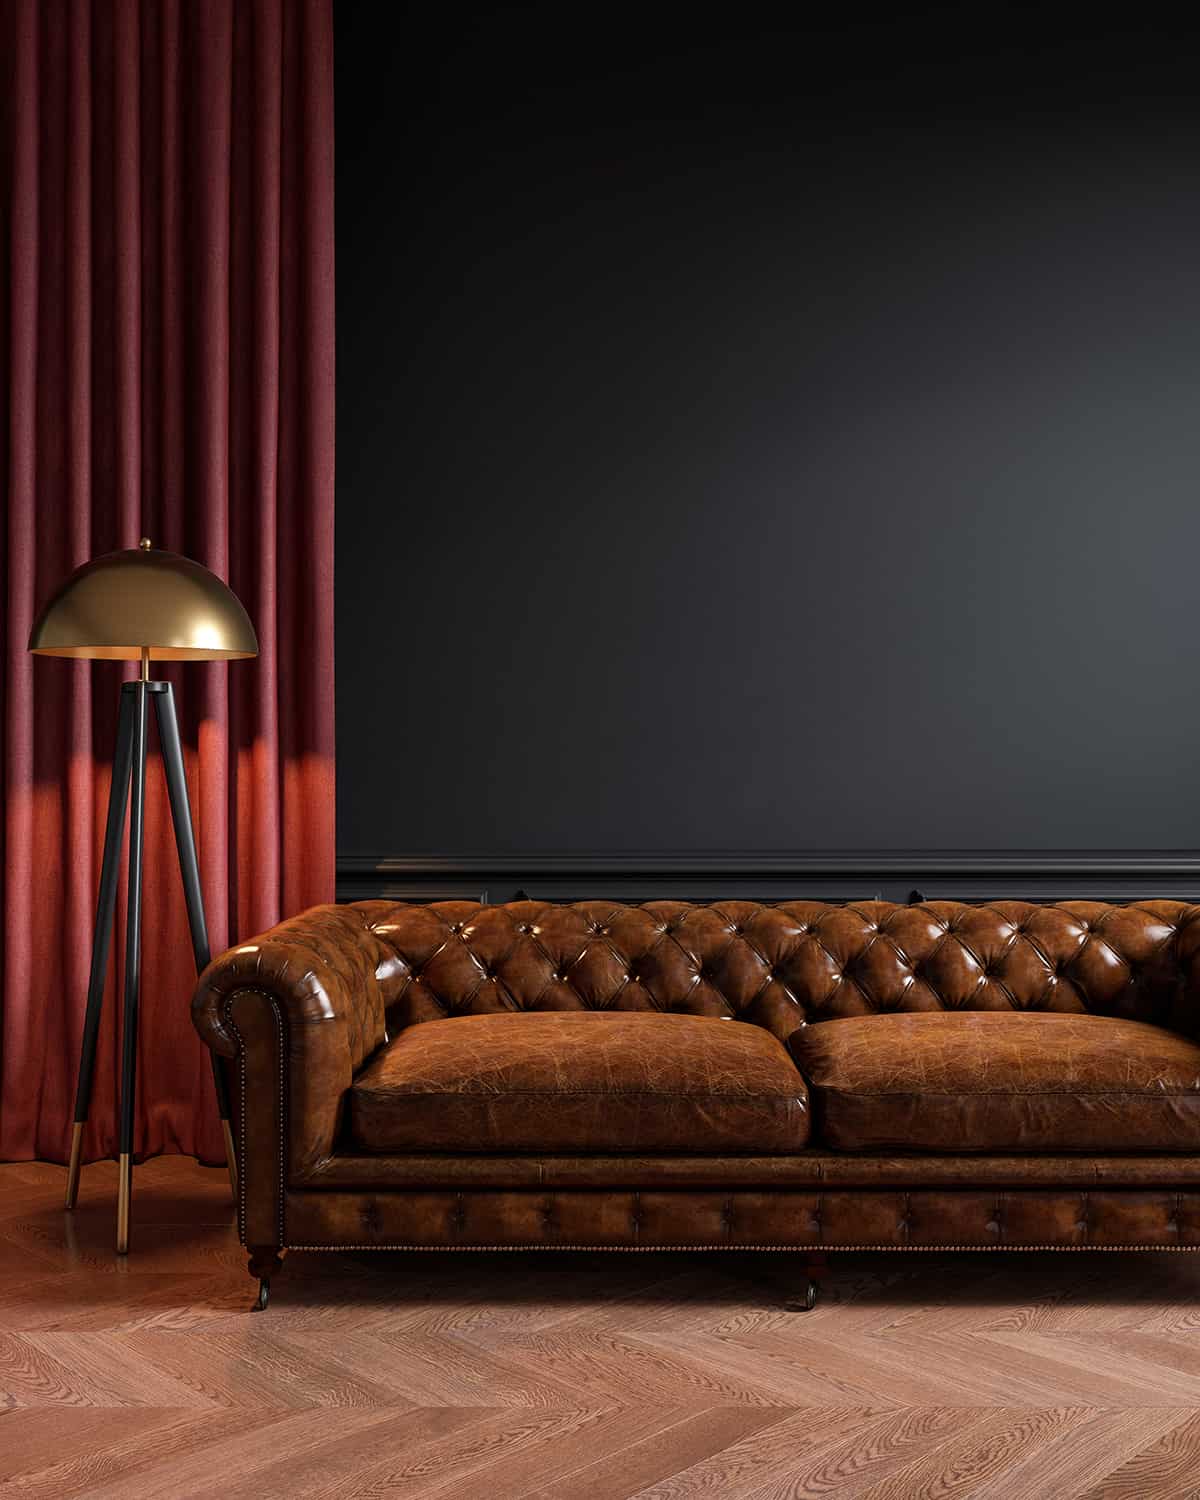 What Color Curtains Go With Brown Sofa, What Color Curtains With Dark Brown Couch